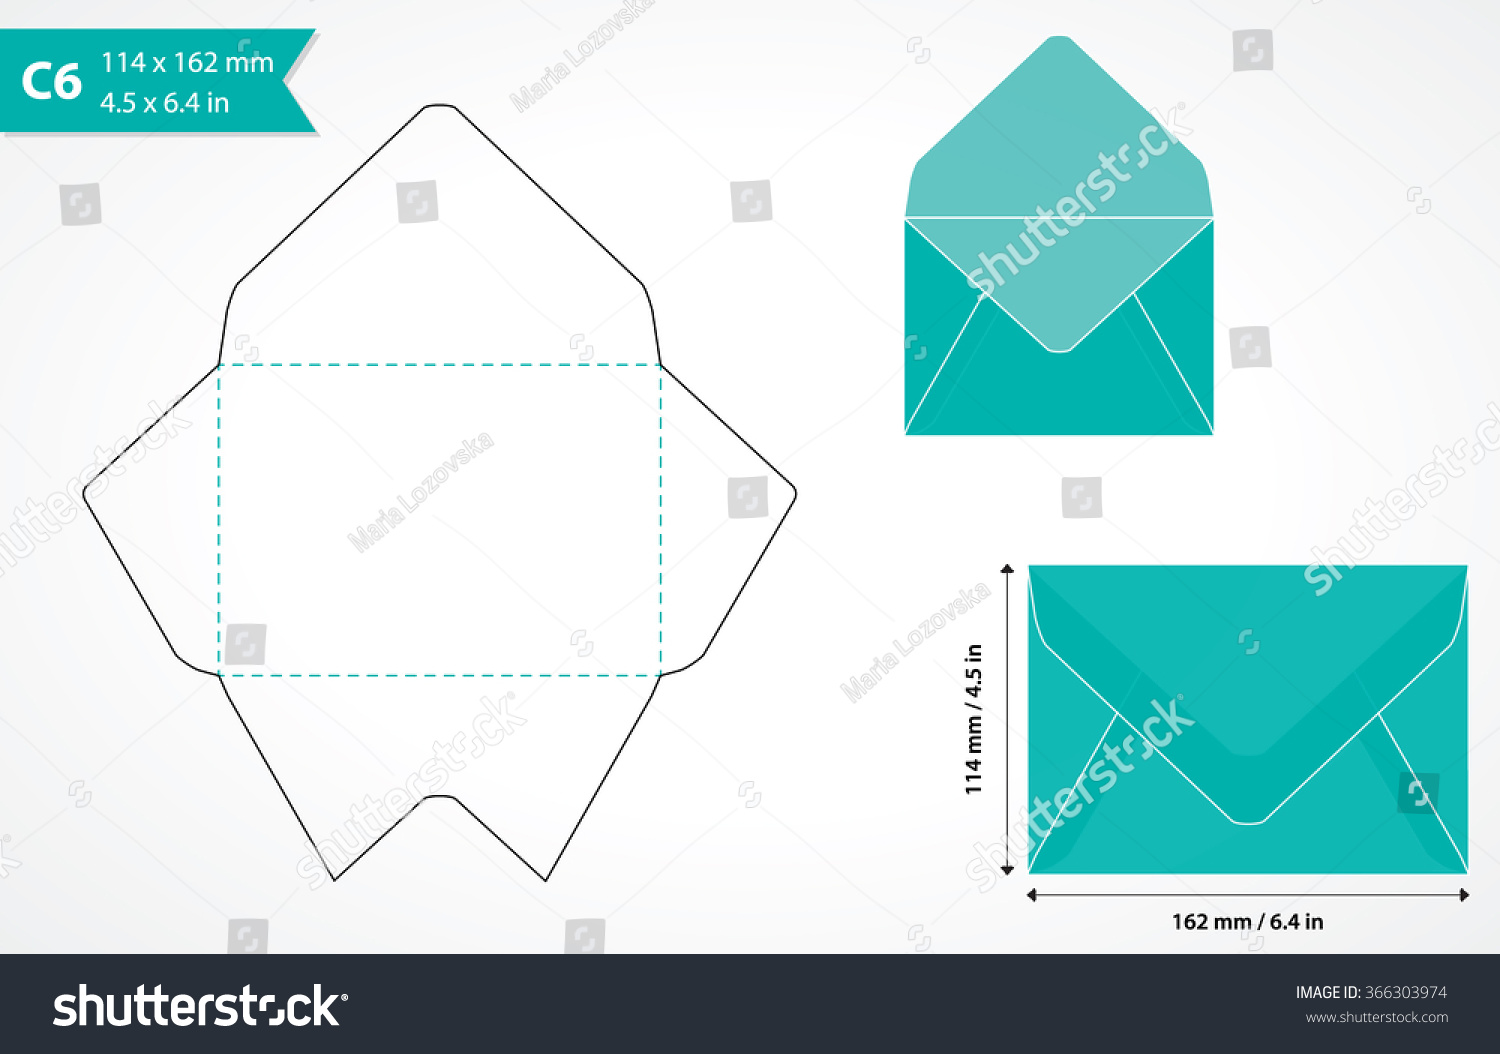 Cutout Paper Envelope Template Perfect Making Stock Vector In Envelope Templates For Card Making